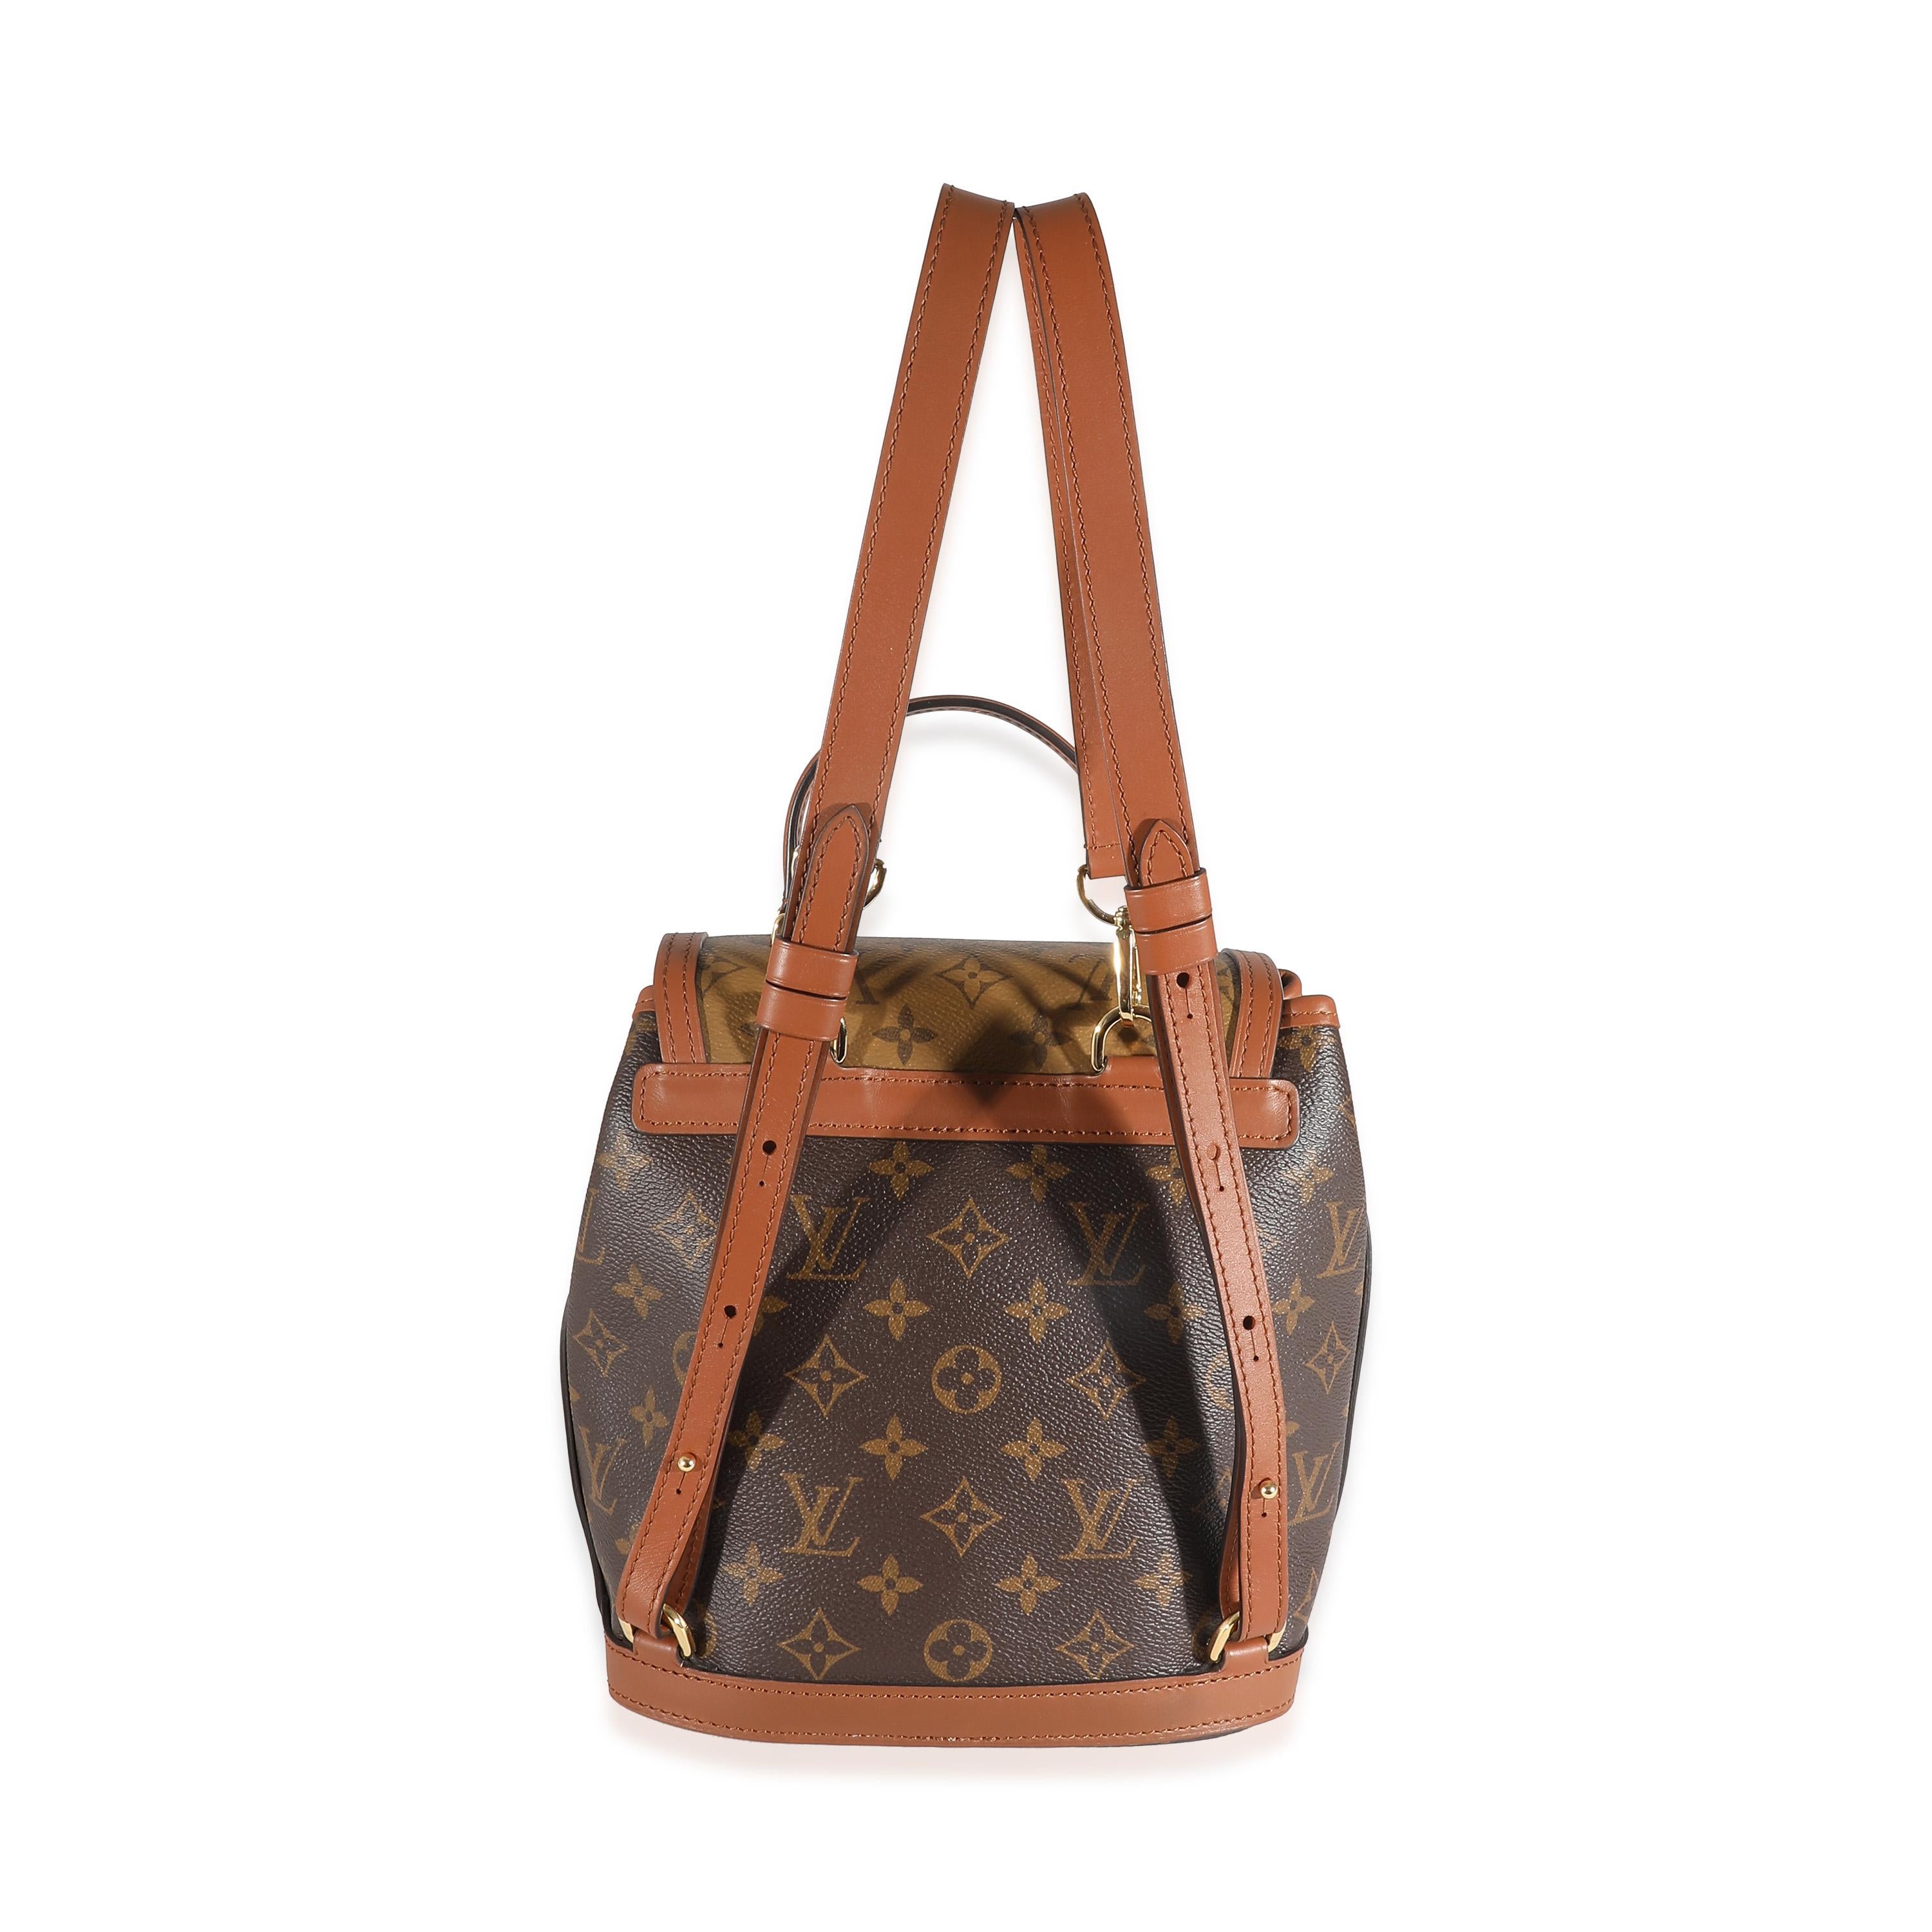 Listing Title: Louis Vuitton Monogram Reverse Canvas Dauphine Backpack
SKU: 136368
Condition: Pre-owned 
Handbag Condition: Excellent
Condition Comments: Item is in excellent condition and displays light signs of wear.  Light scratching along